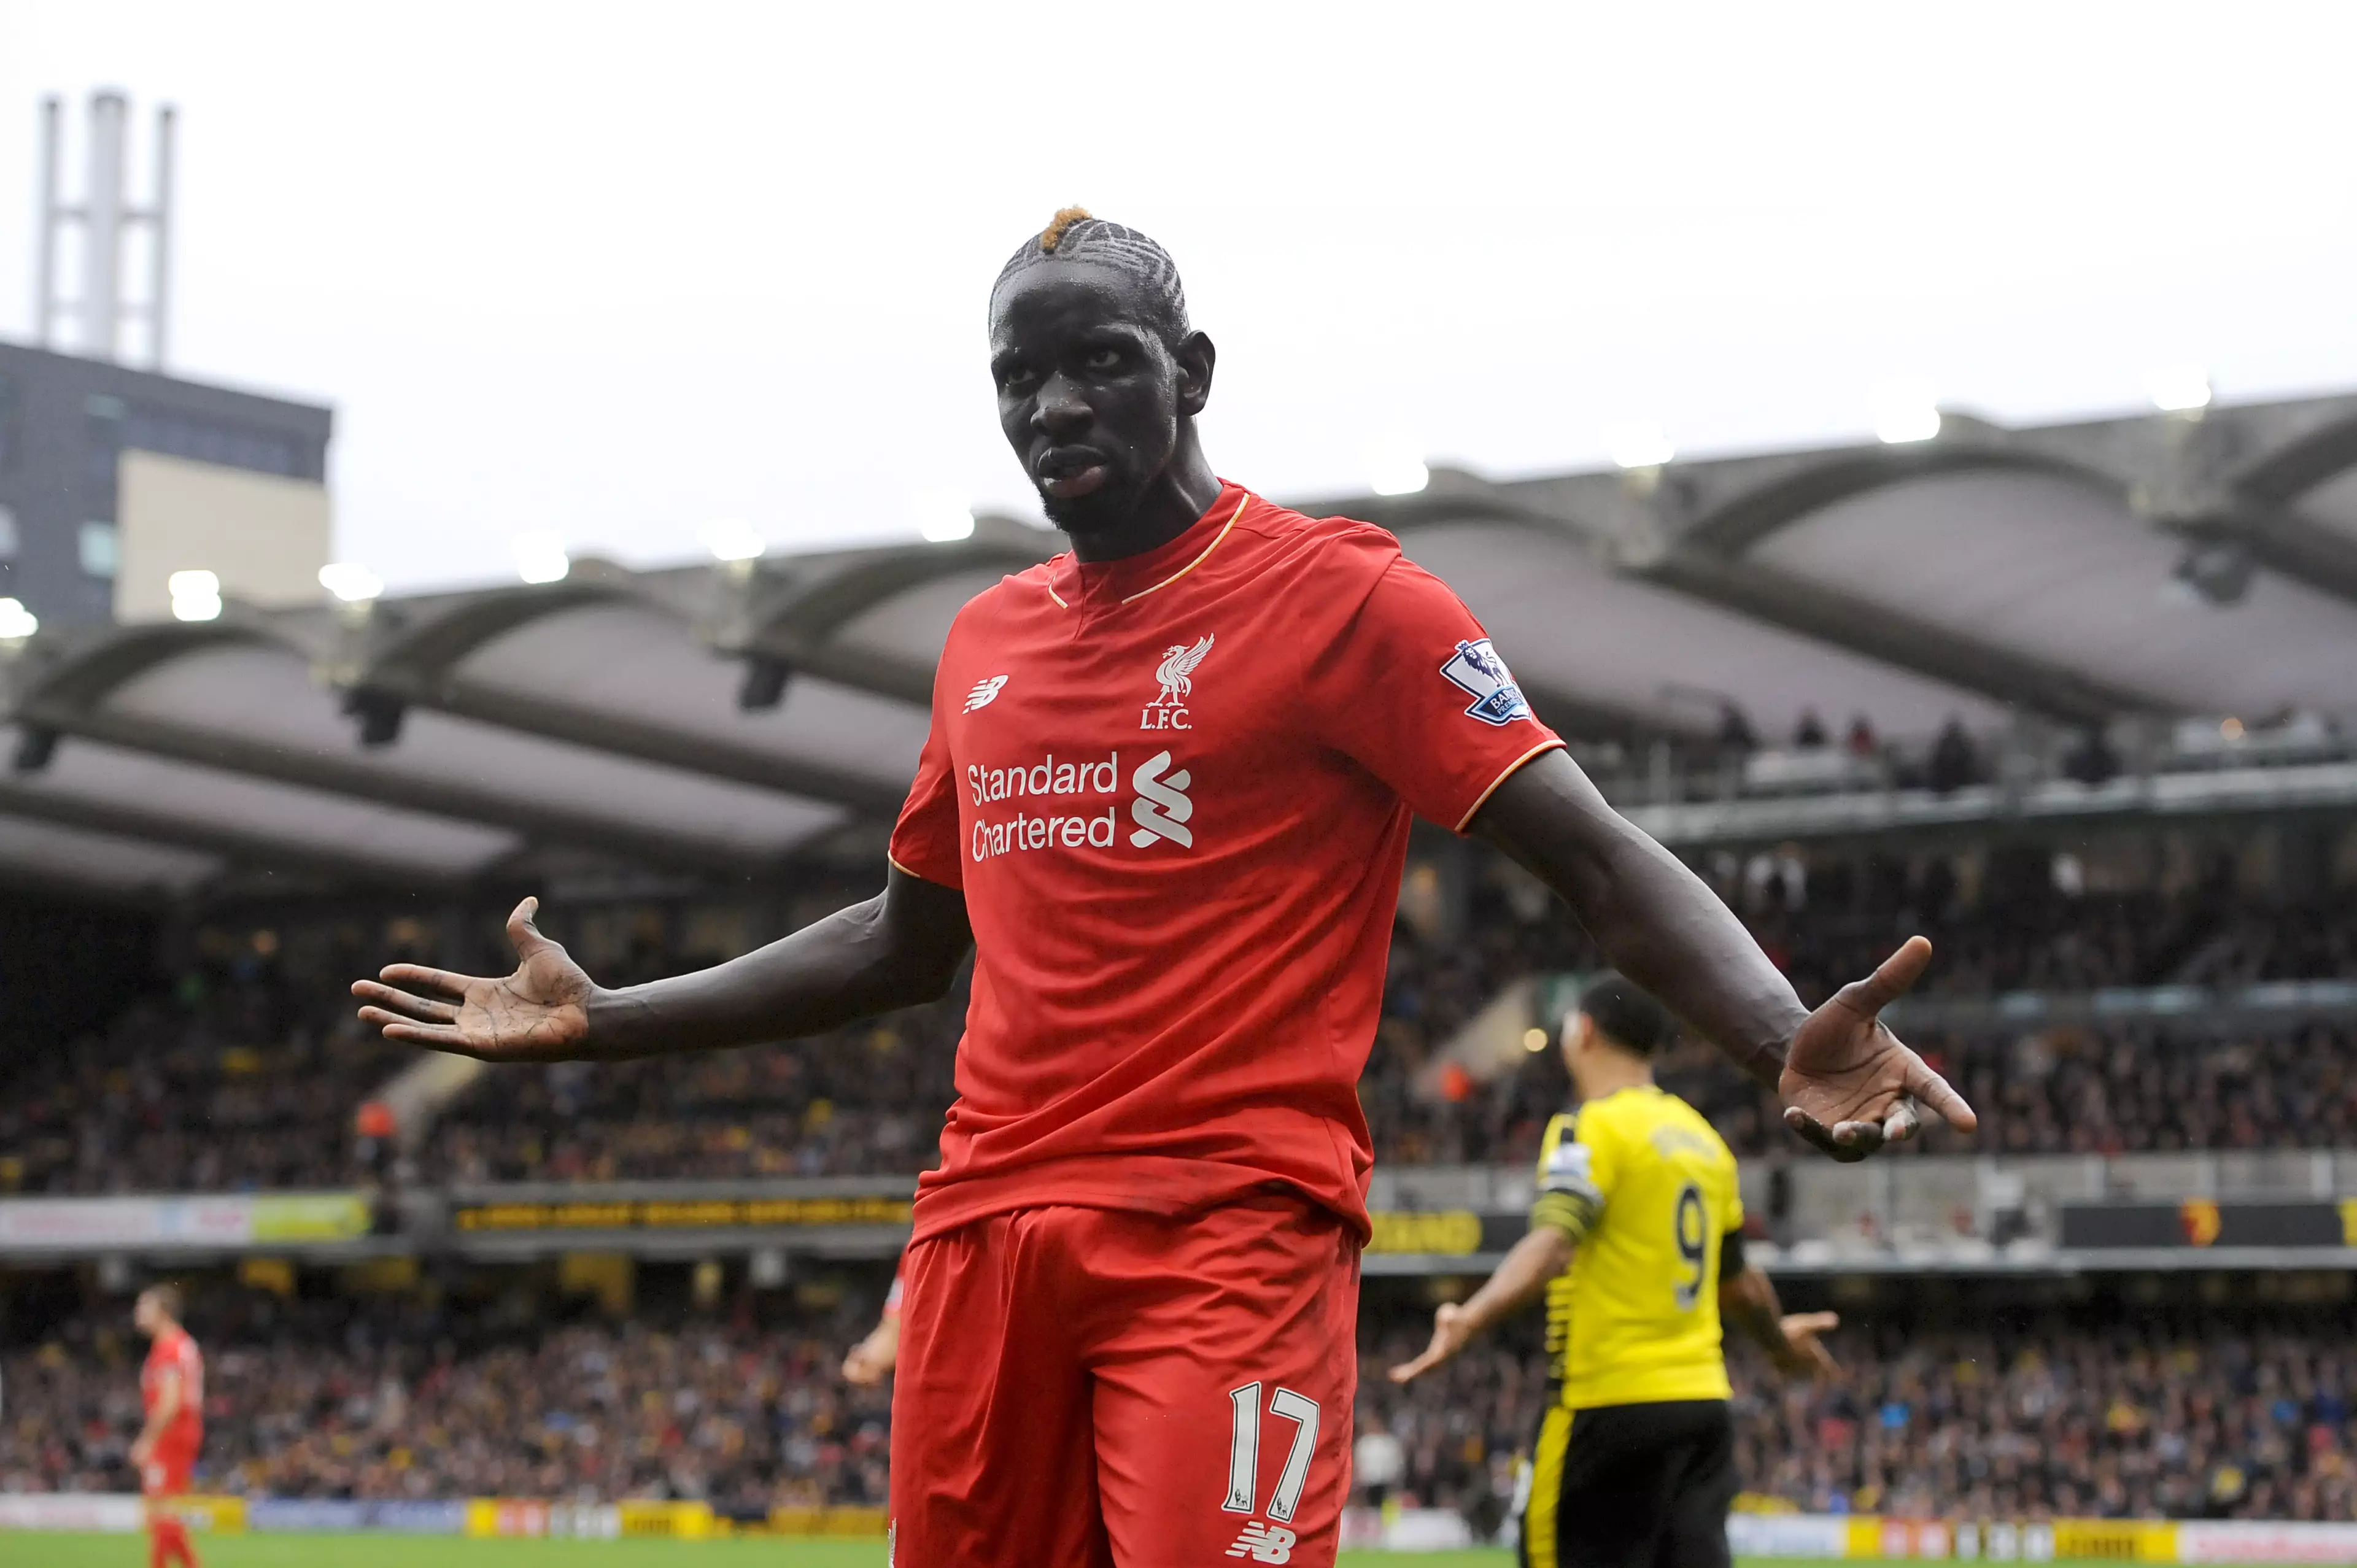 Mamadou Sakho Accepts Positive Drugs Test Findings